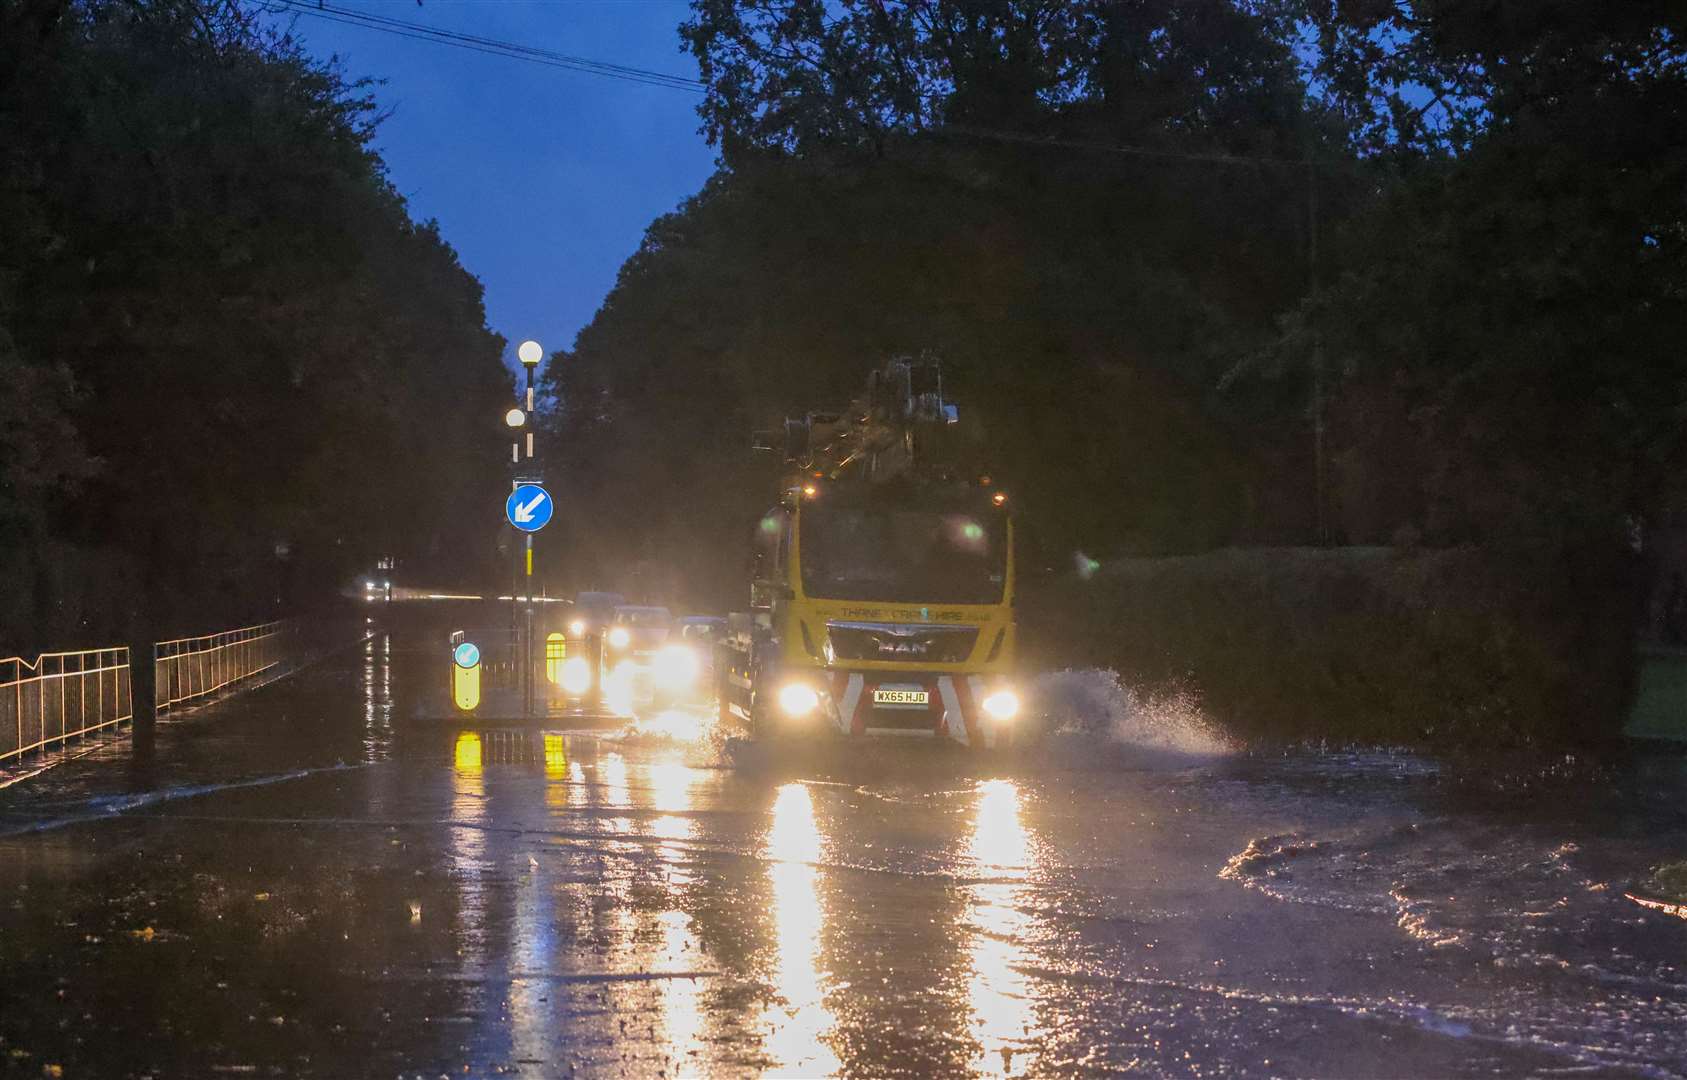 Flooding in Willington Street dip. Picture: UKNIP